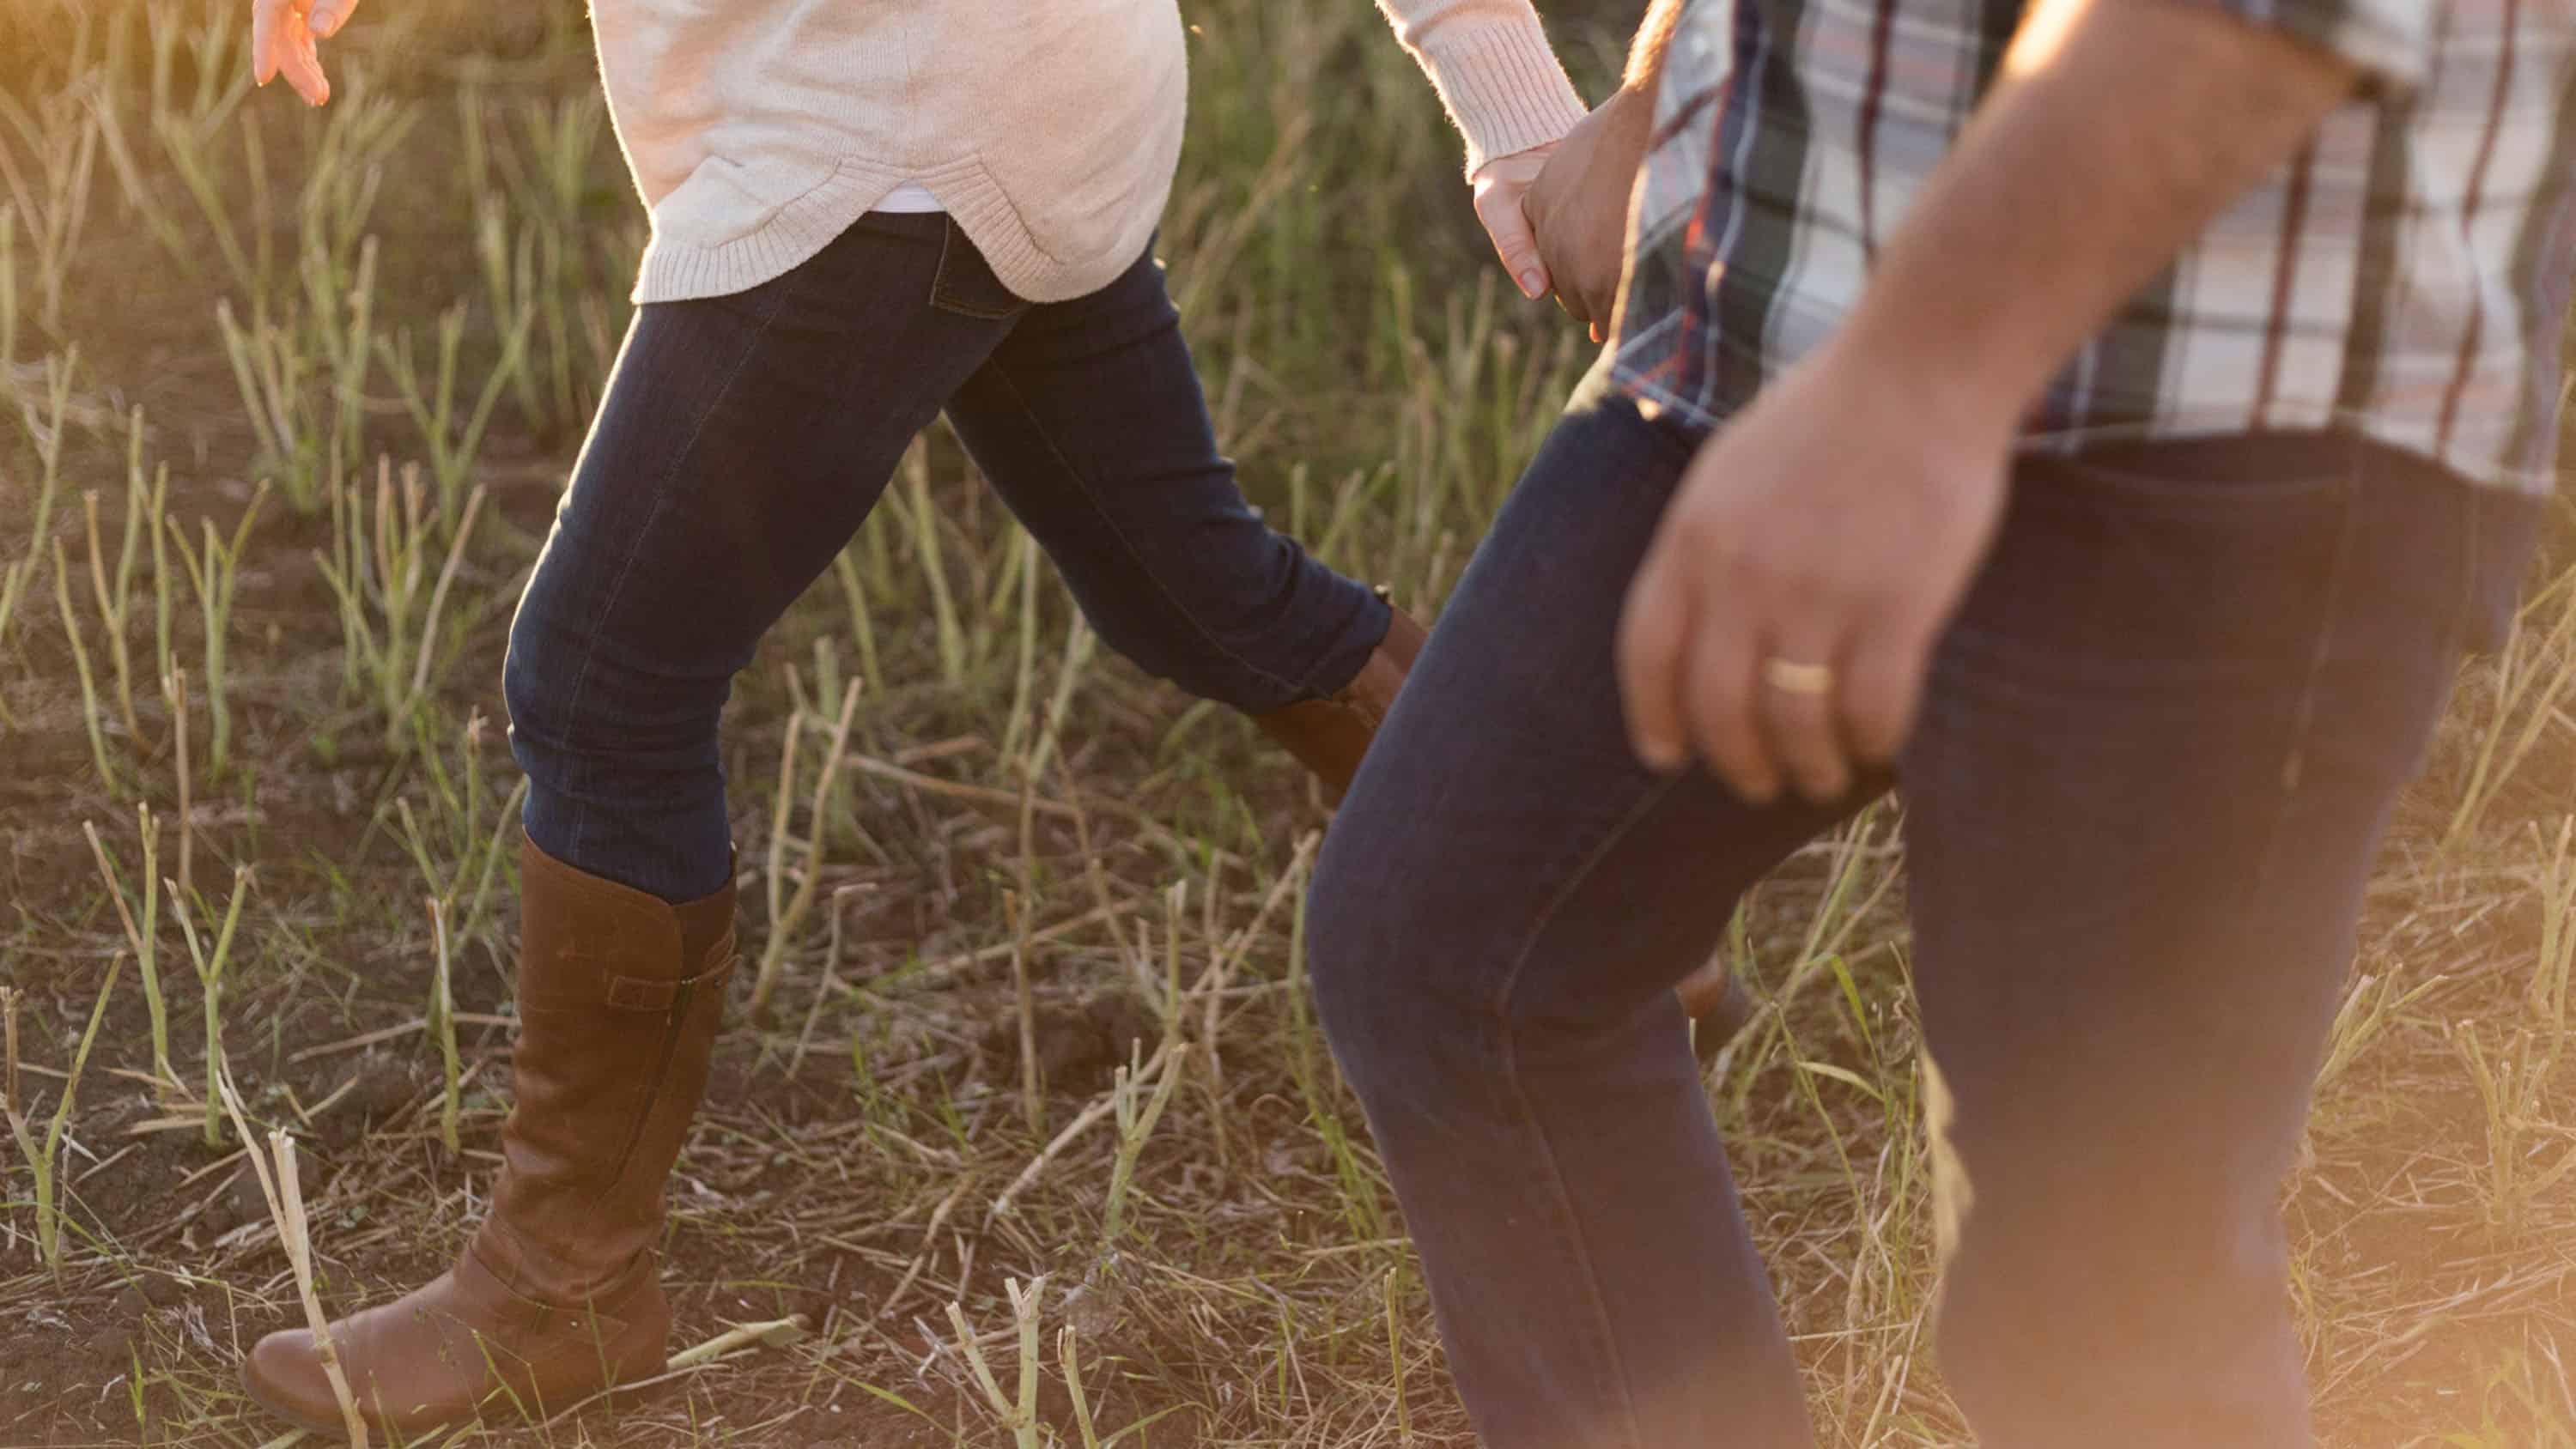 Close up of the legs of a married couple walking through a field. They’re both wearing jeans and holding hands.